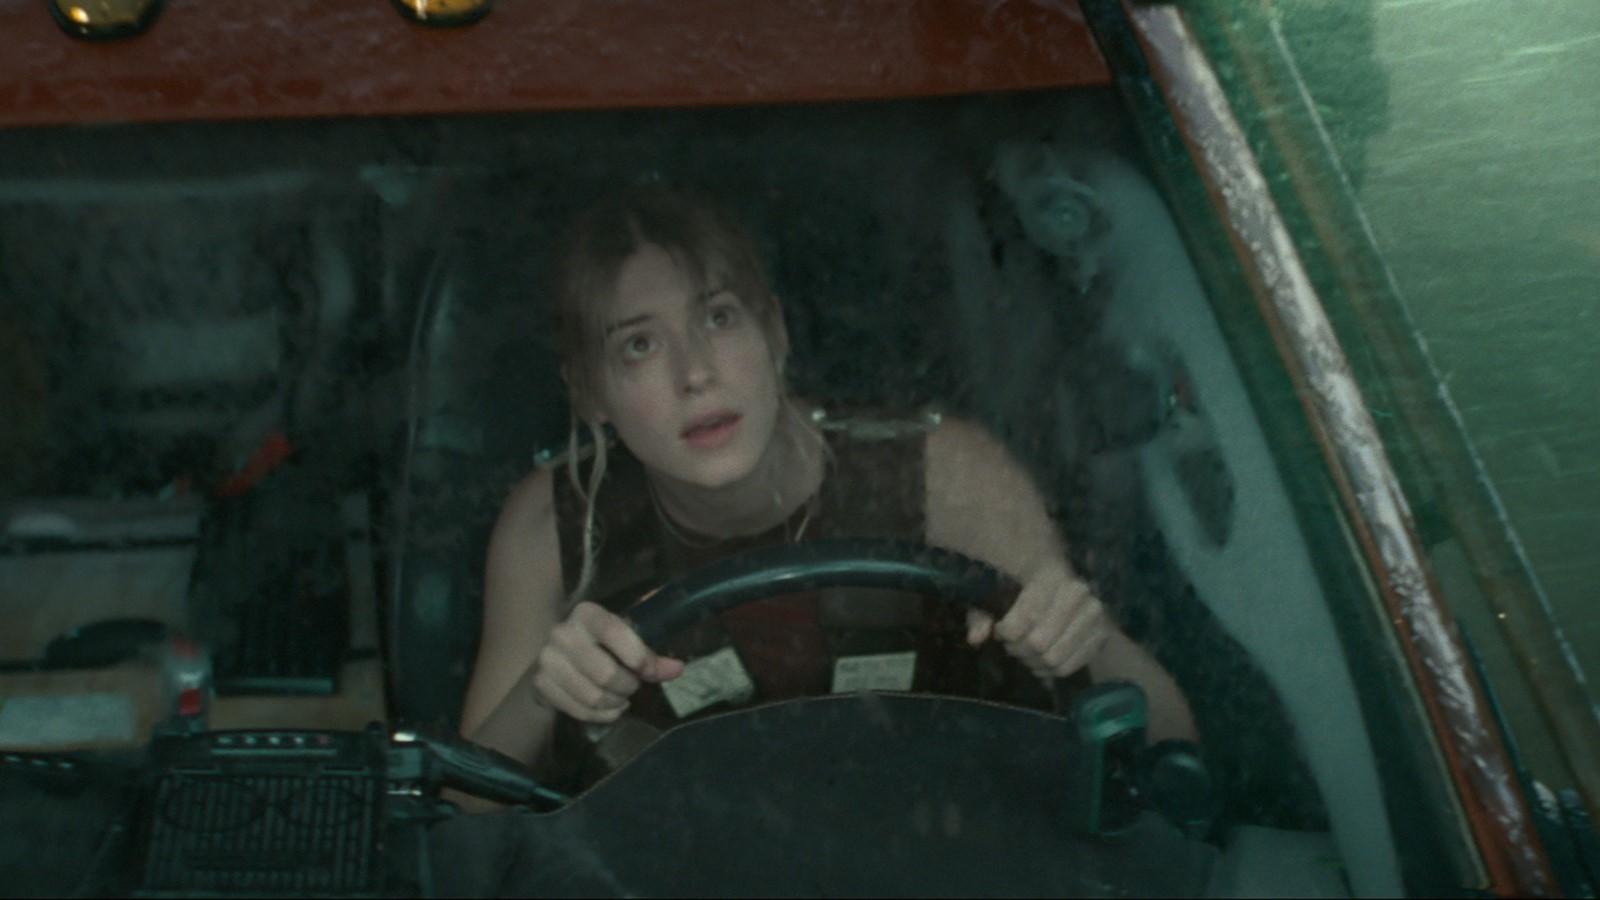 Daisy Edgar-Jones as Kate in Twisters, sitting in a car and looking up